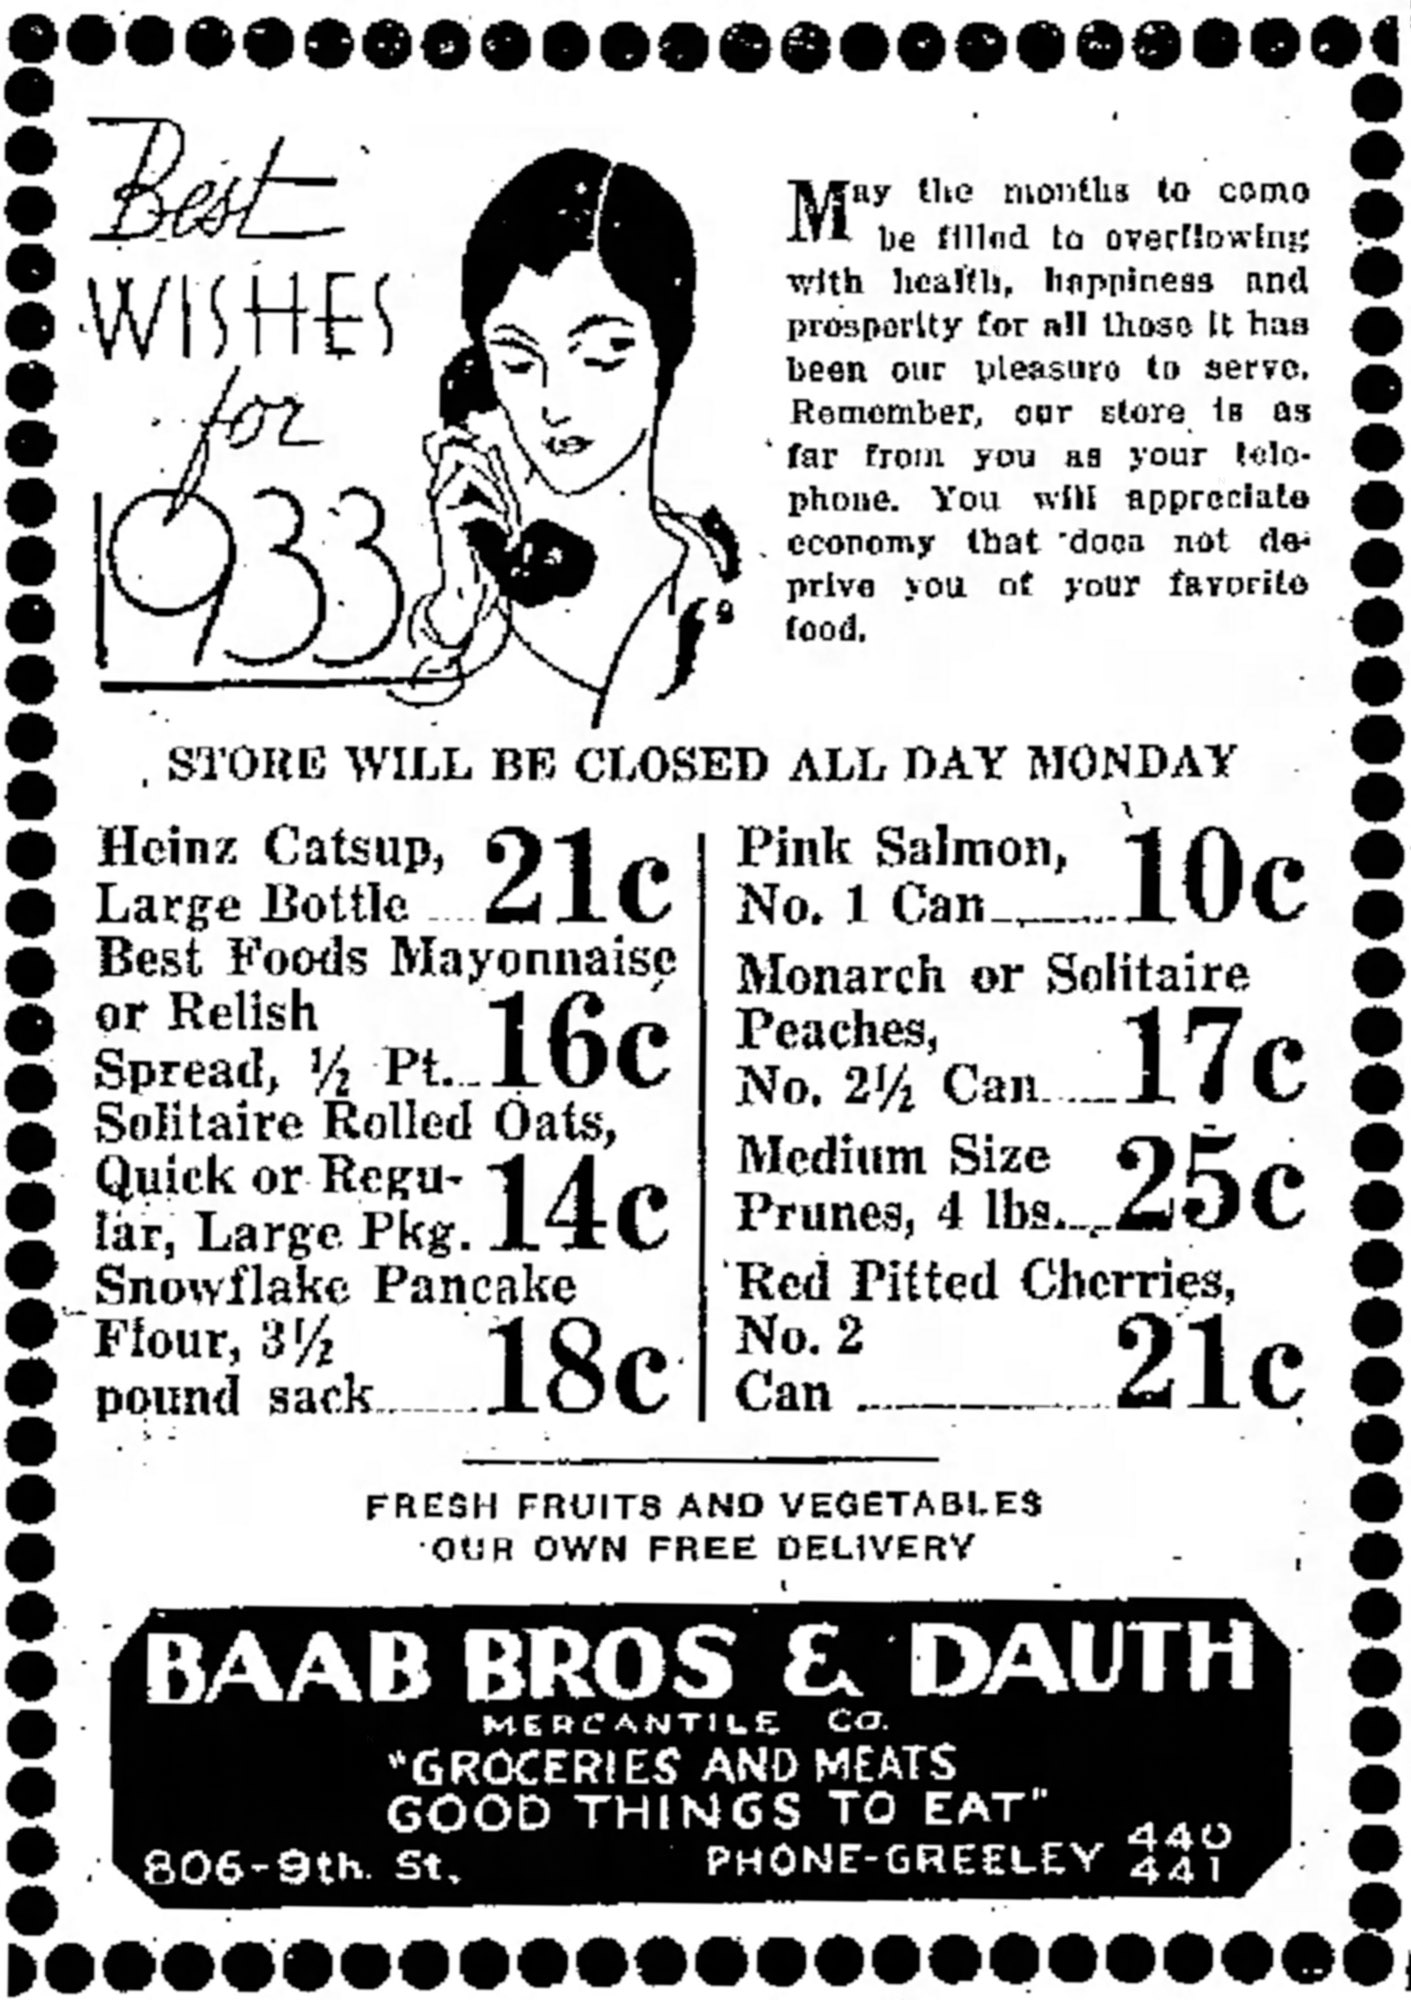 Dauth Family Archive - 1932-12-30 - Greeley Daily Tribune - Baab Bros and Dauth Advertisement